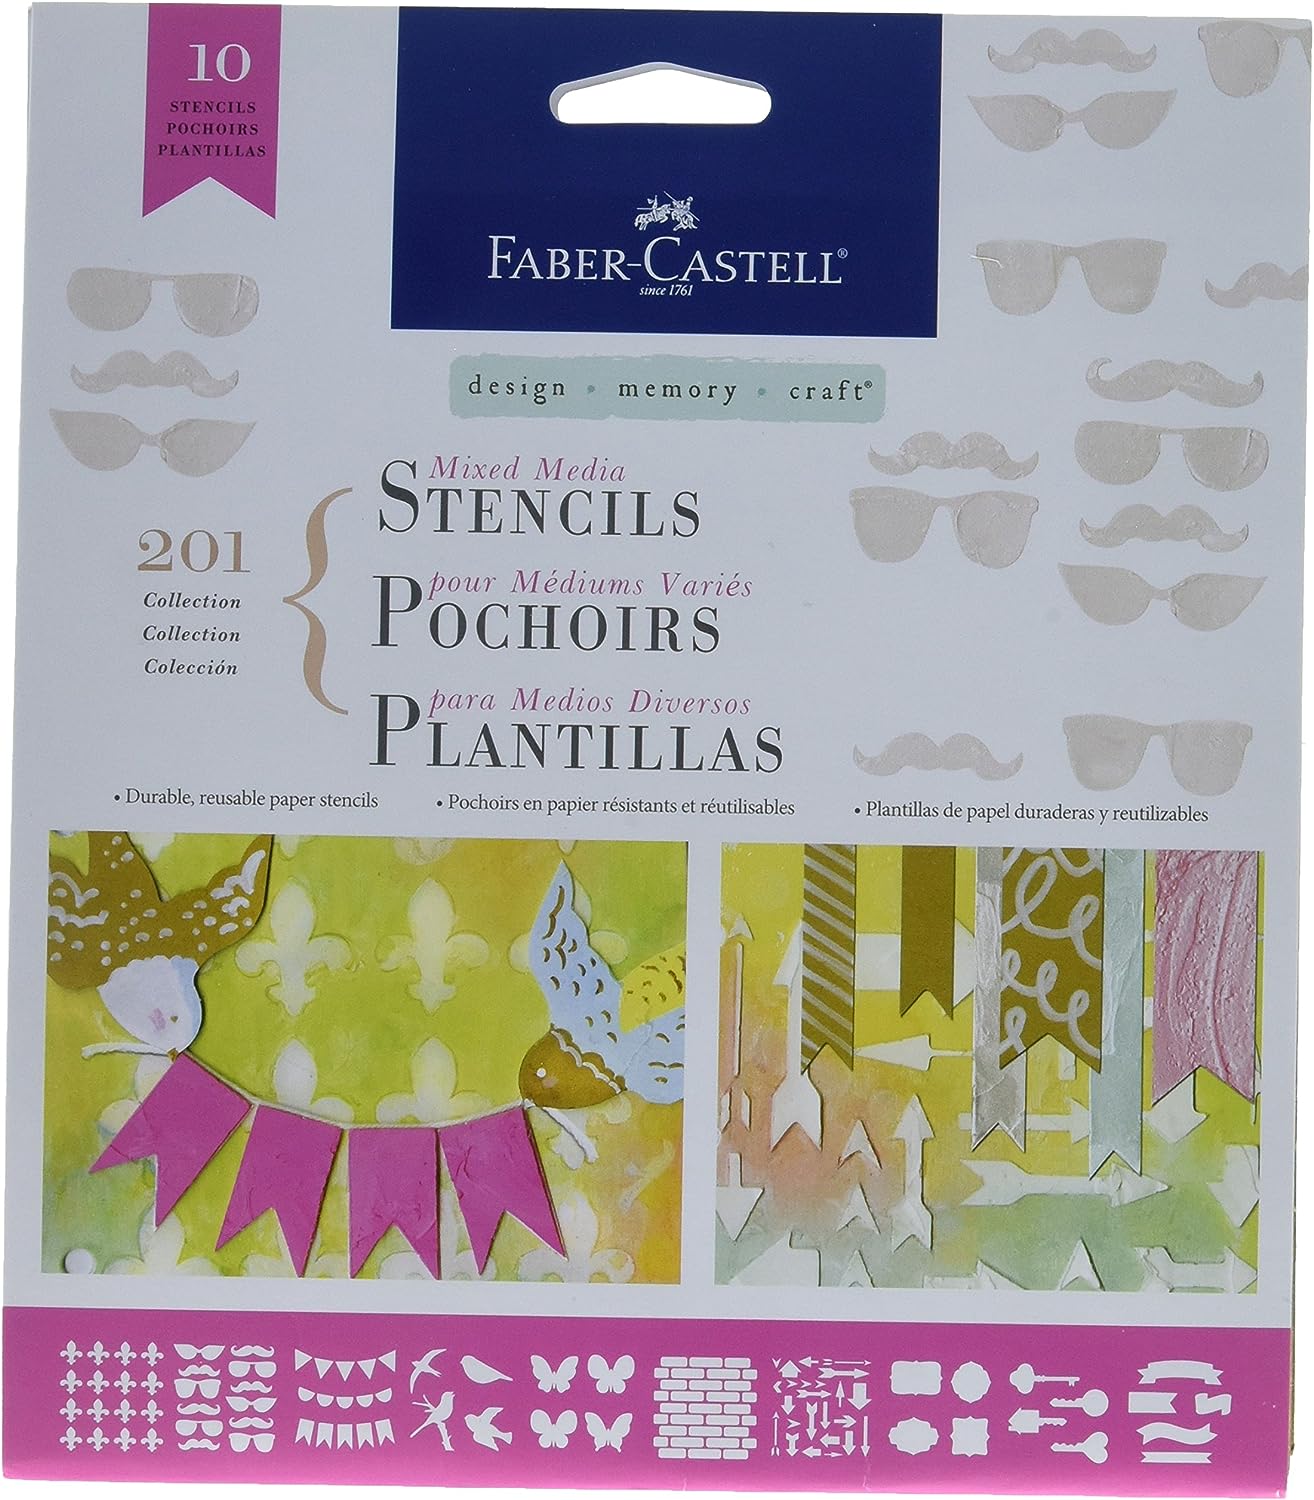  Faber-Castell Mixed Media Stencils 201 Collection - Blesket Canada